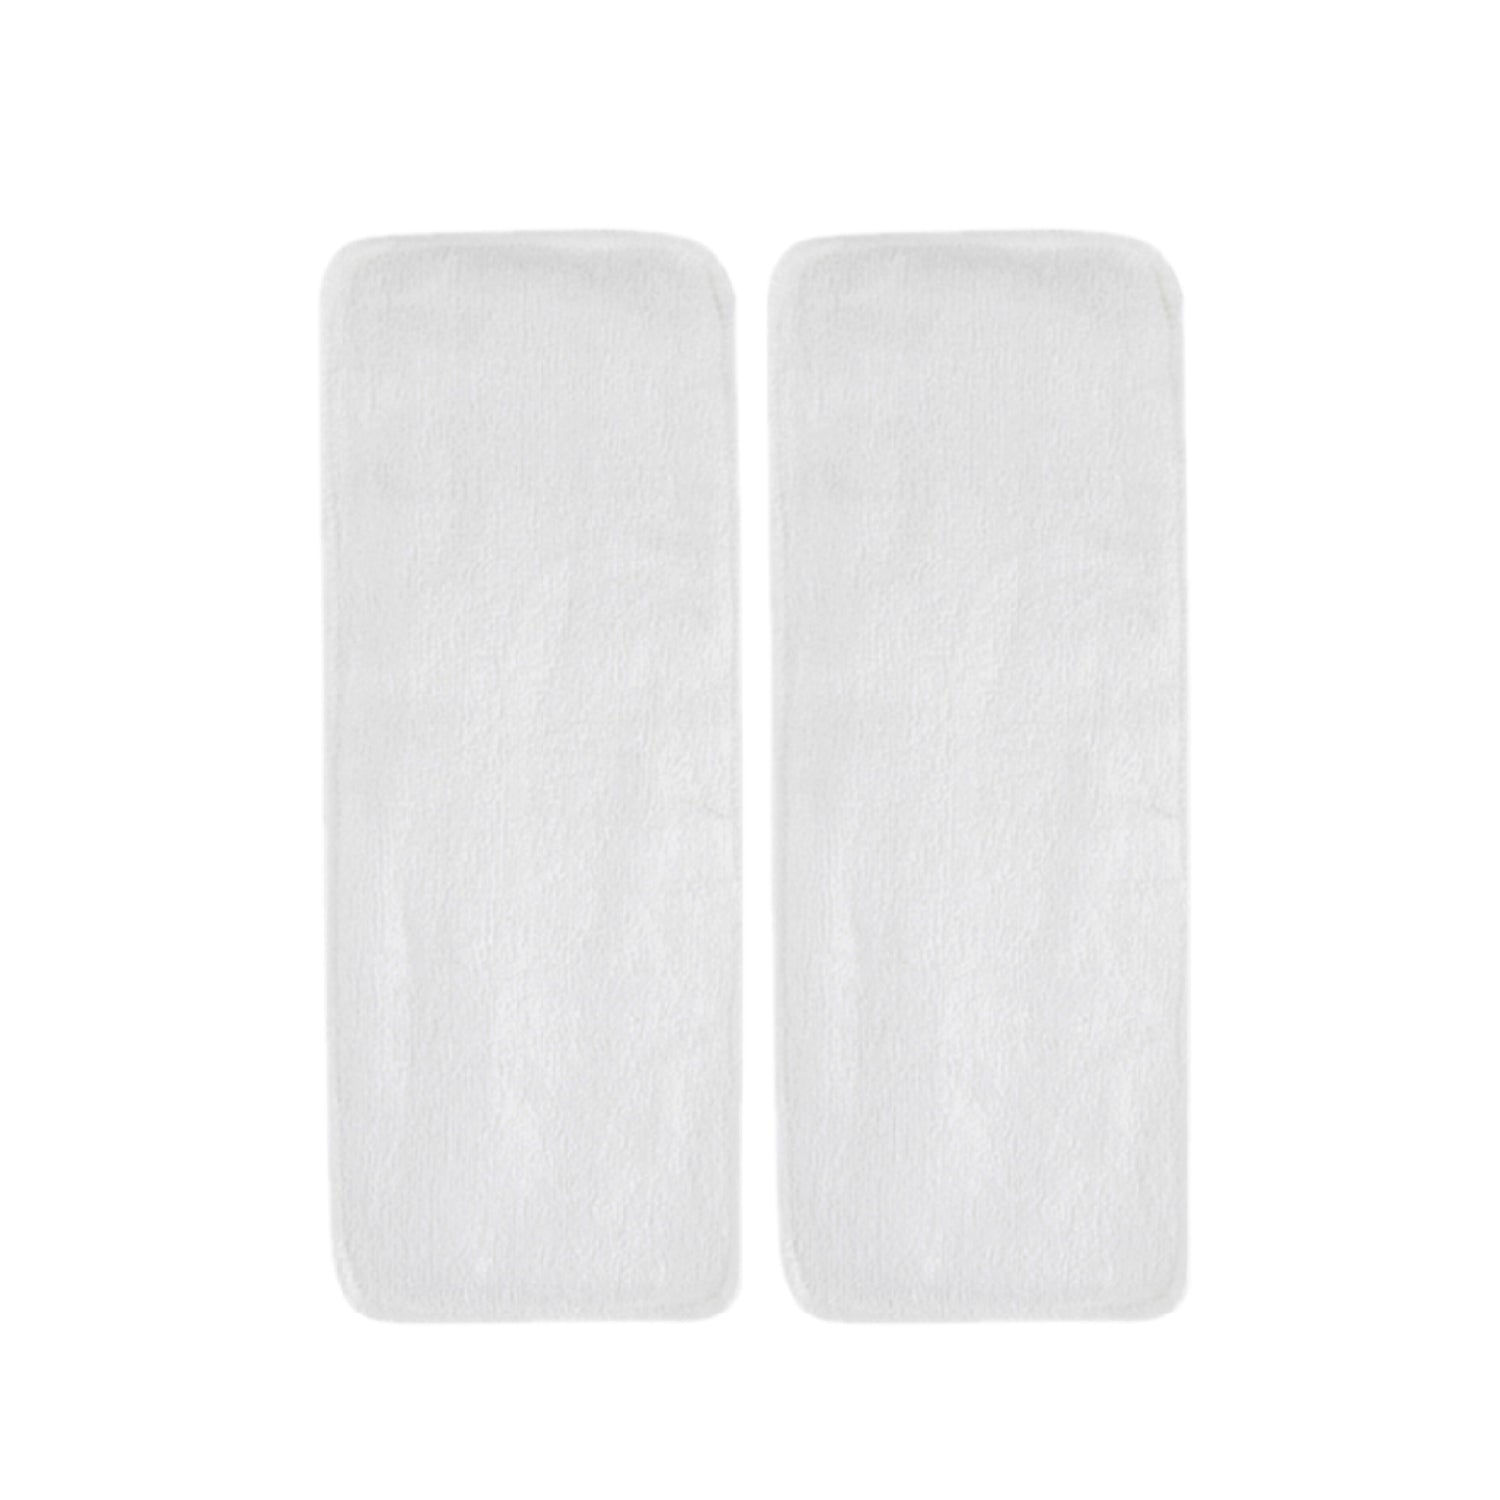 Super Soft White 2 Pk Diaper Liners - Baby Moo